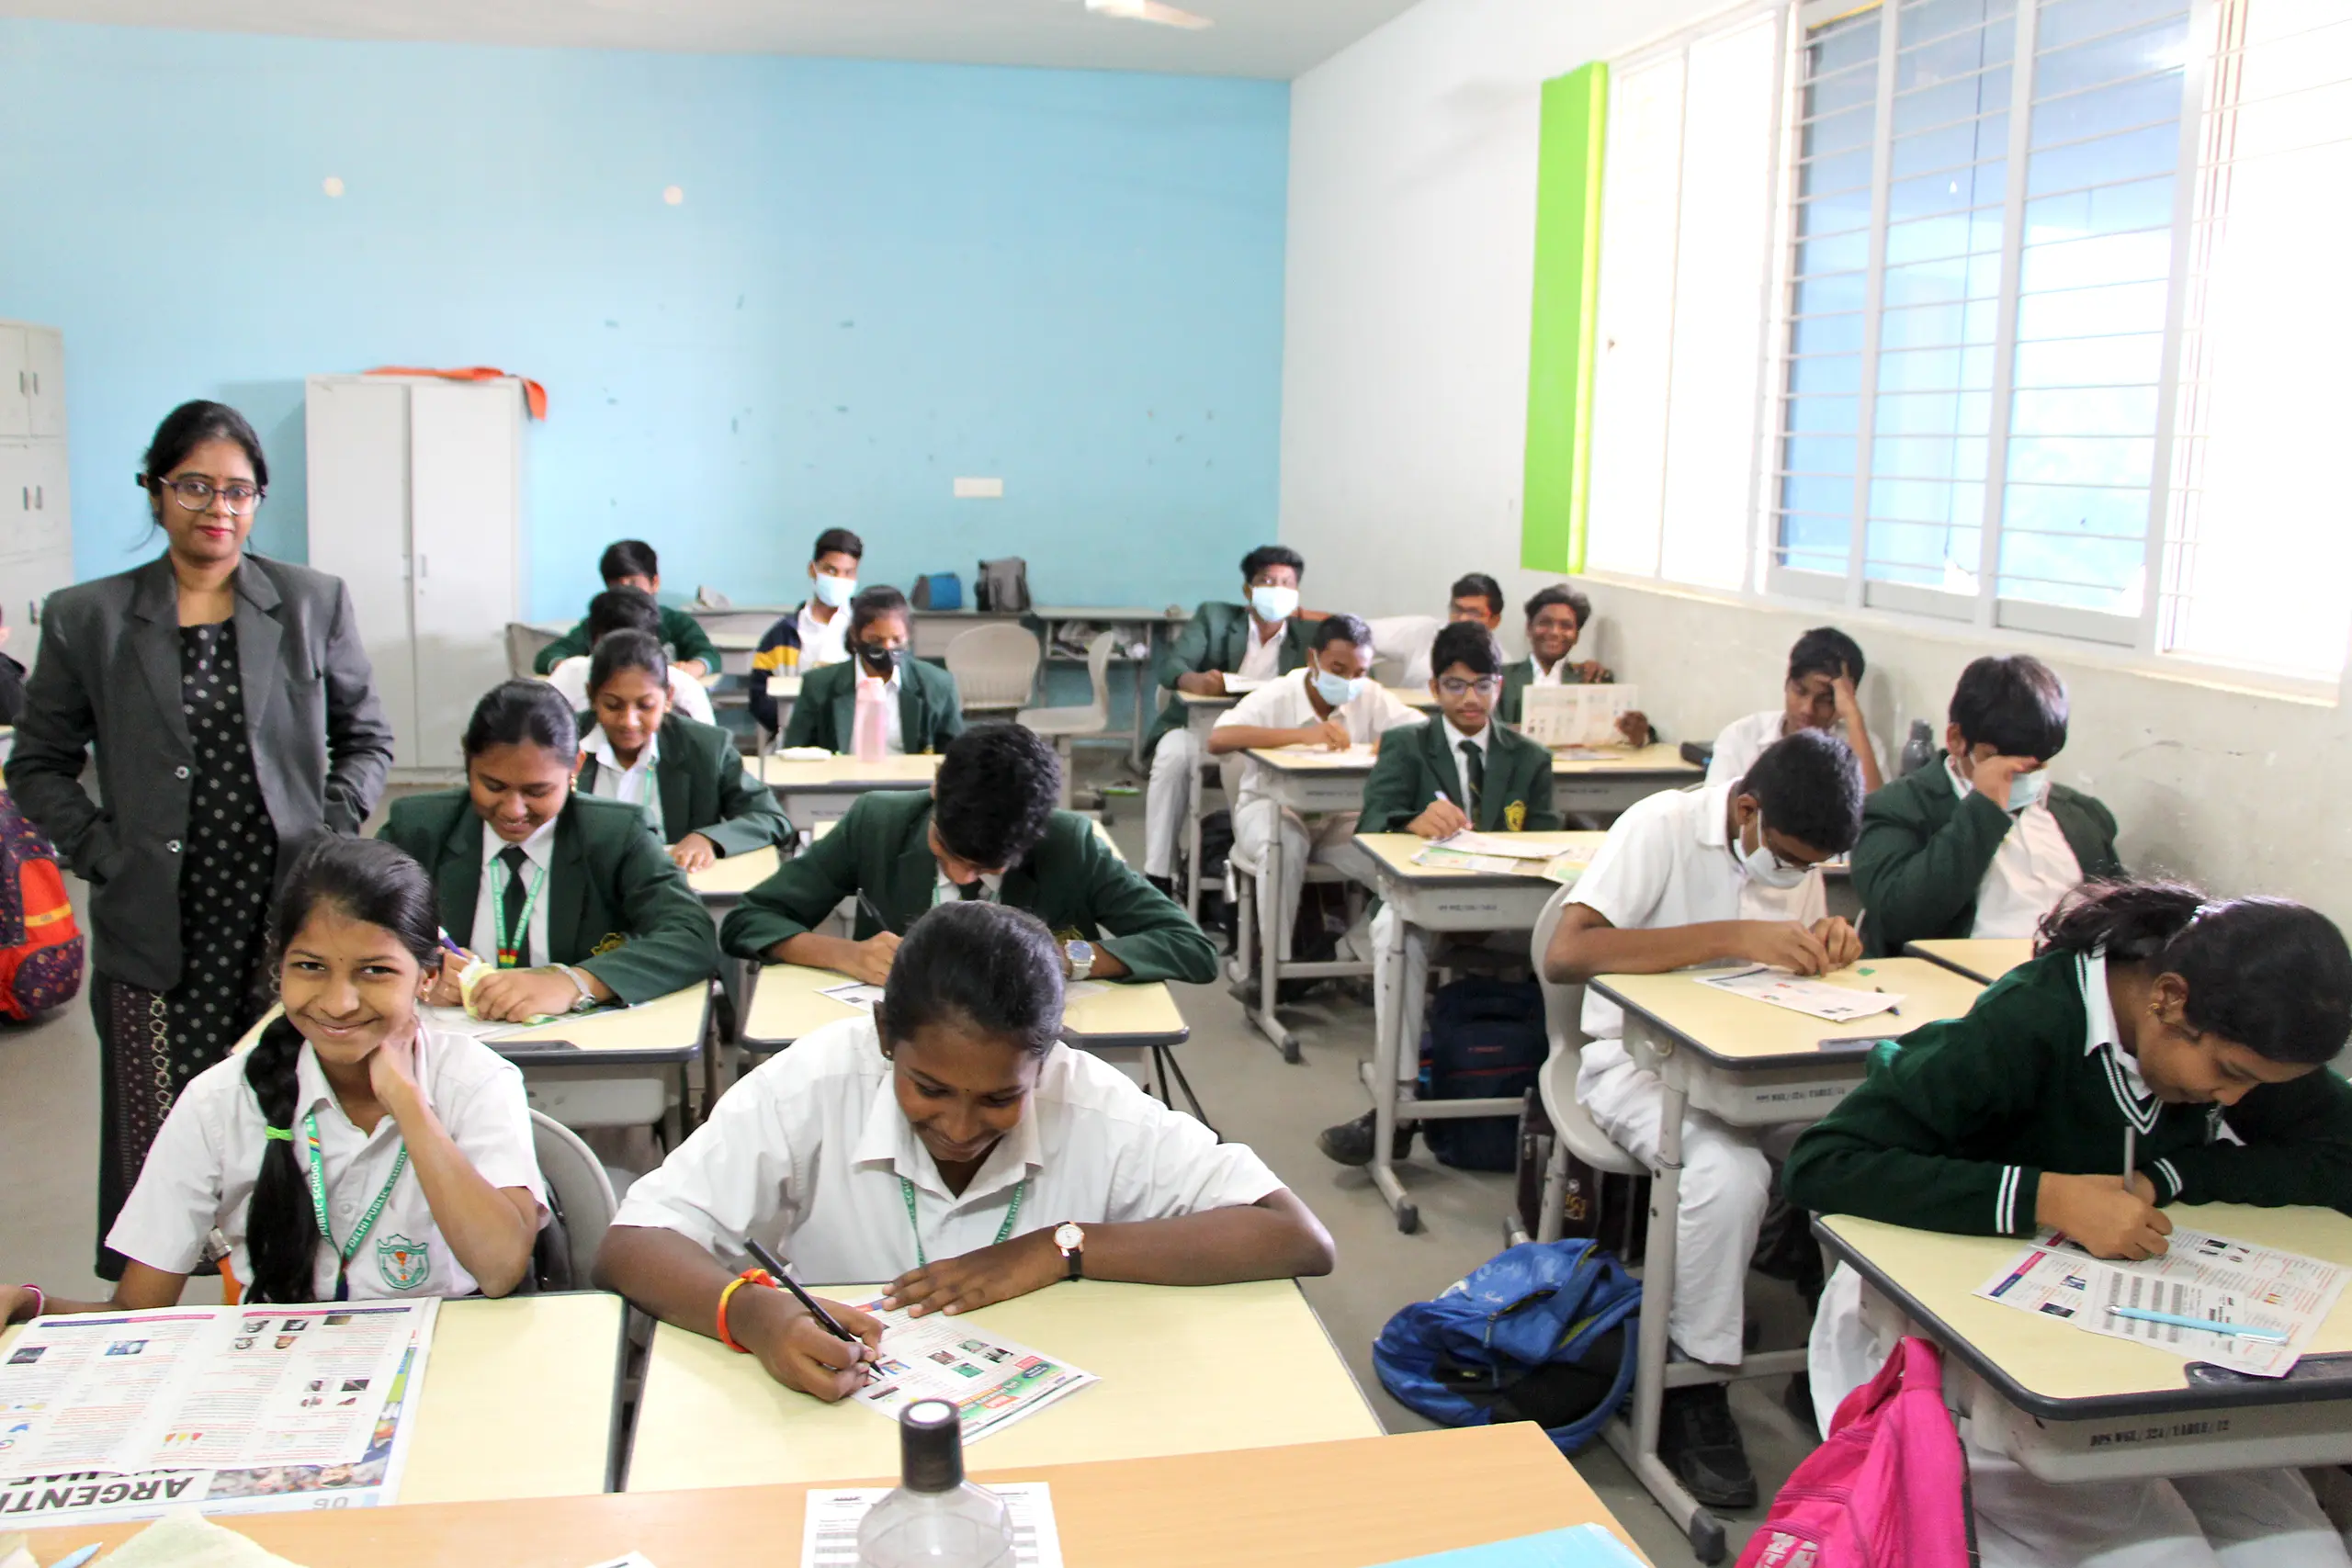 Students giving Chekumuki science test under the supervision of teachers at DPS Warangal.